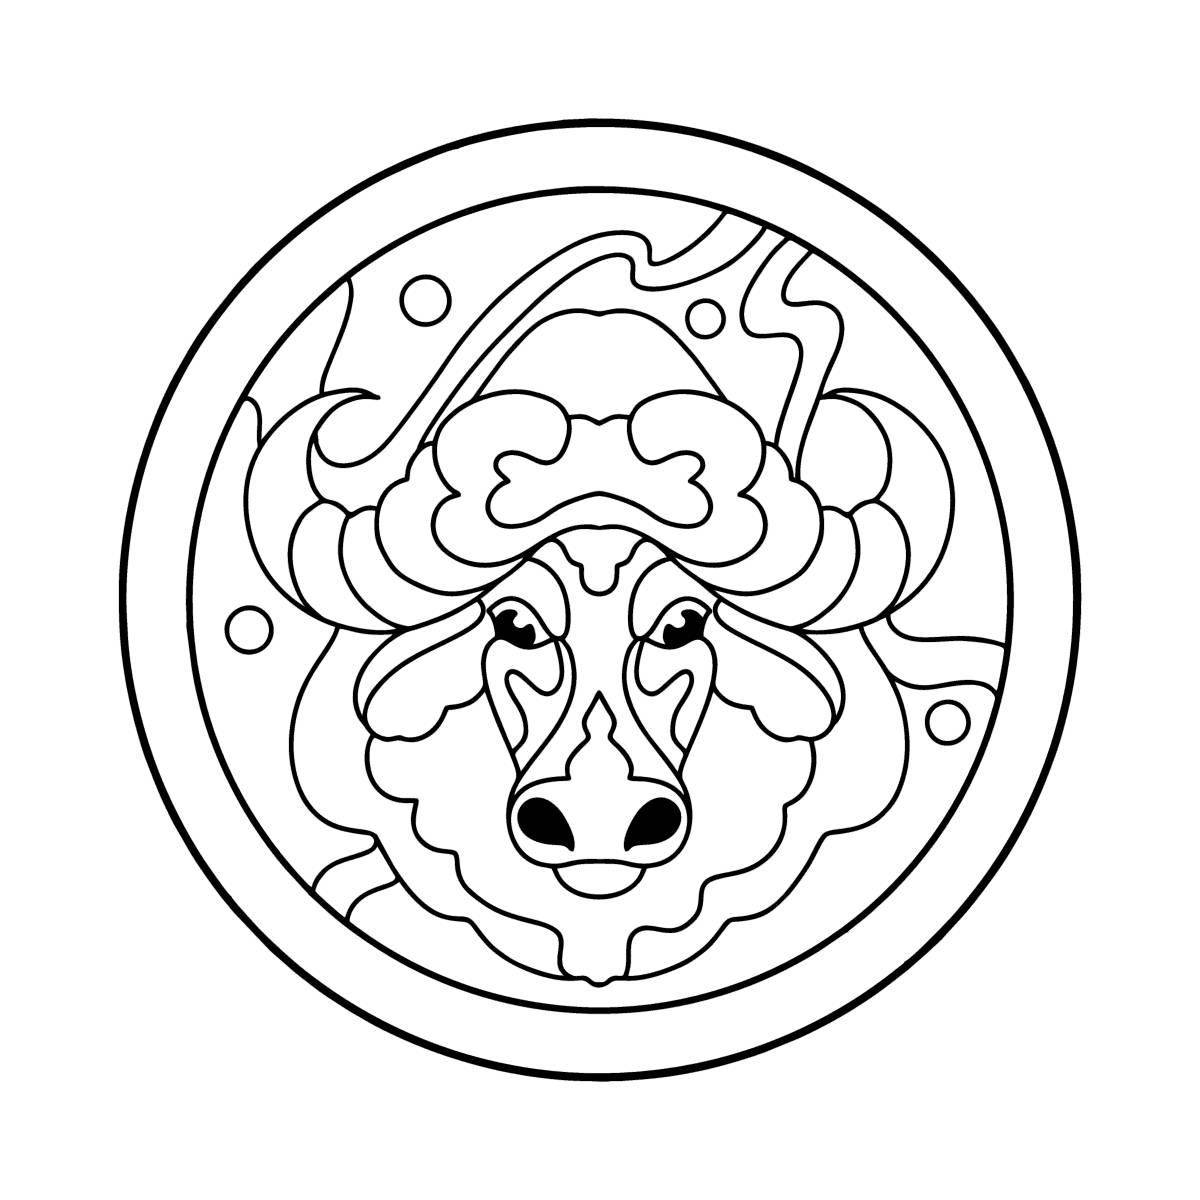 Colorful zodiac signs coloring pages for kids